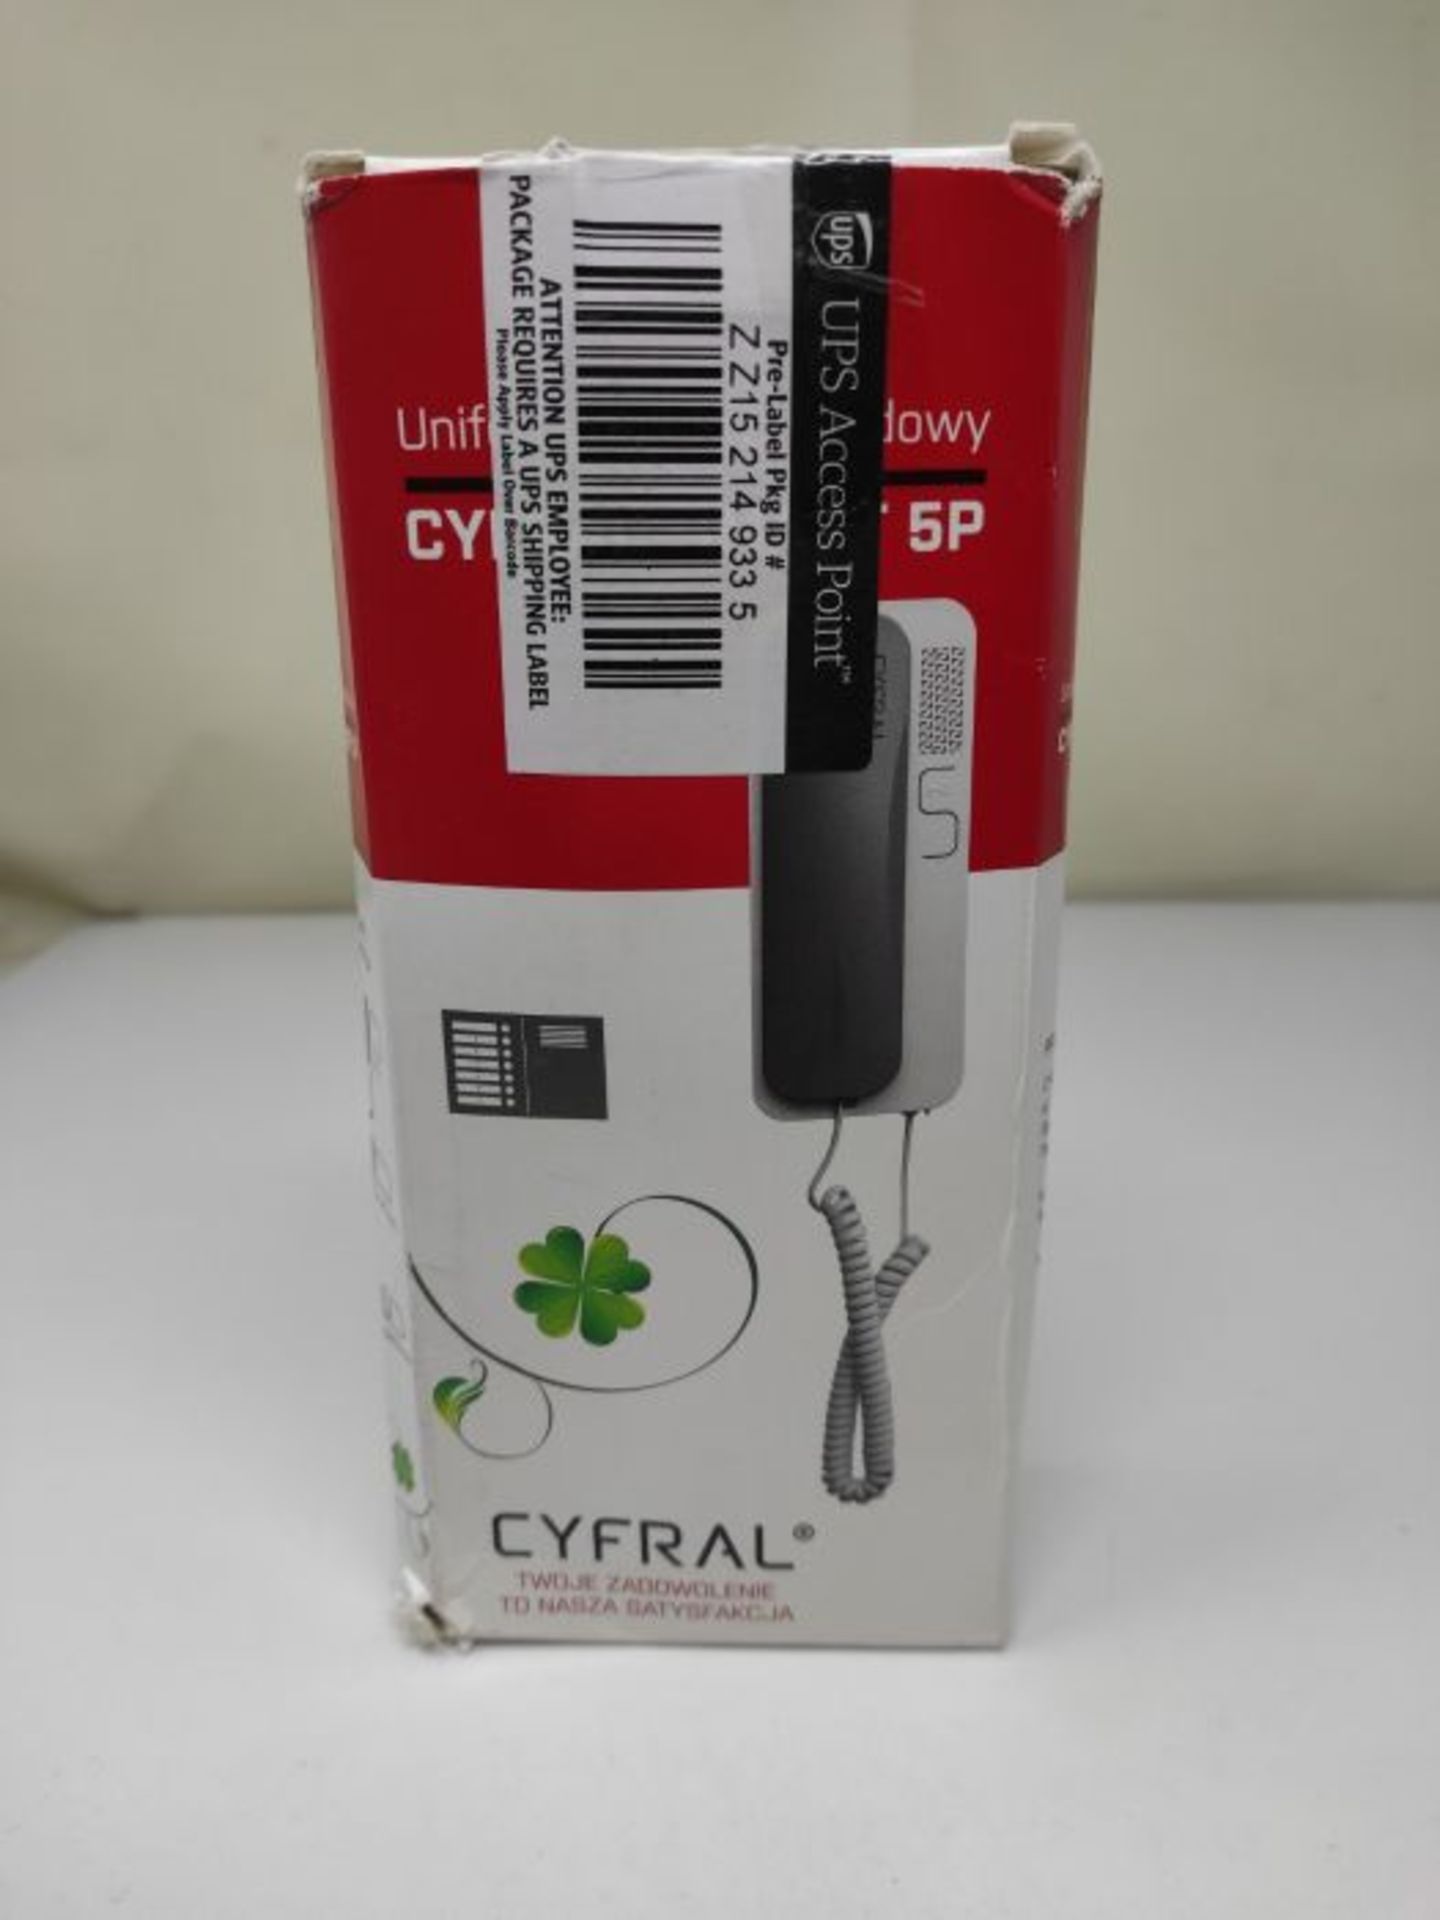 Cyfral Smart 5P Universal Home Phone 4 Plus N, 4, 5, 6 Wire System - Image 2 of 3